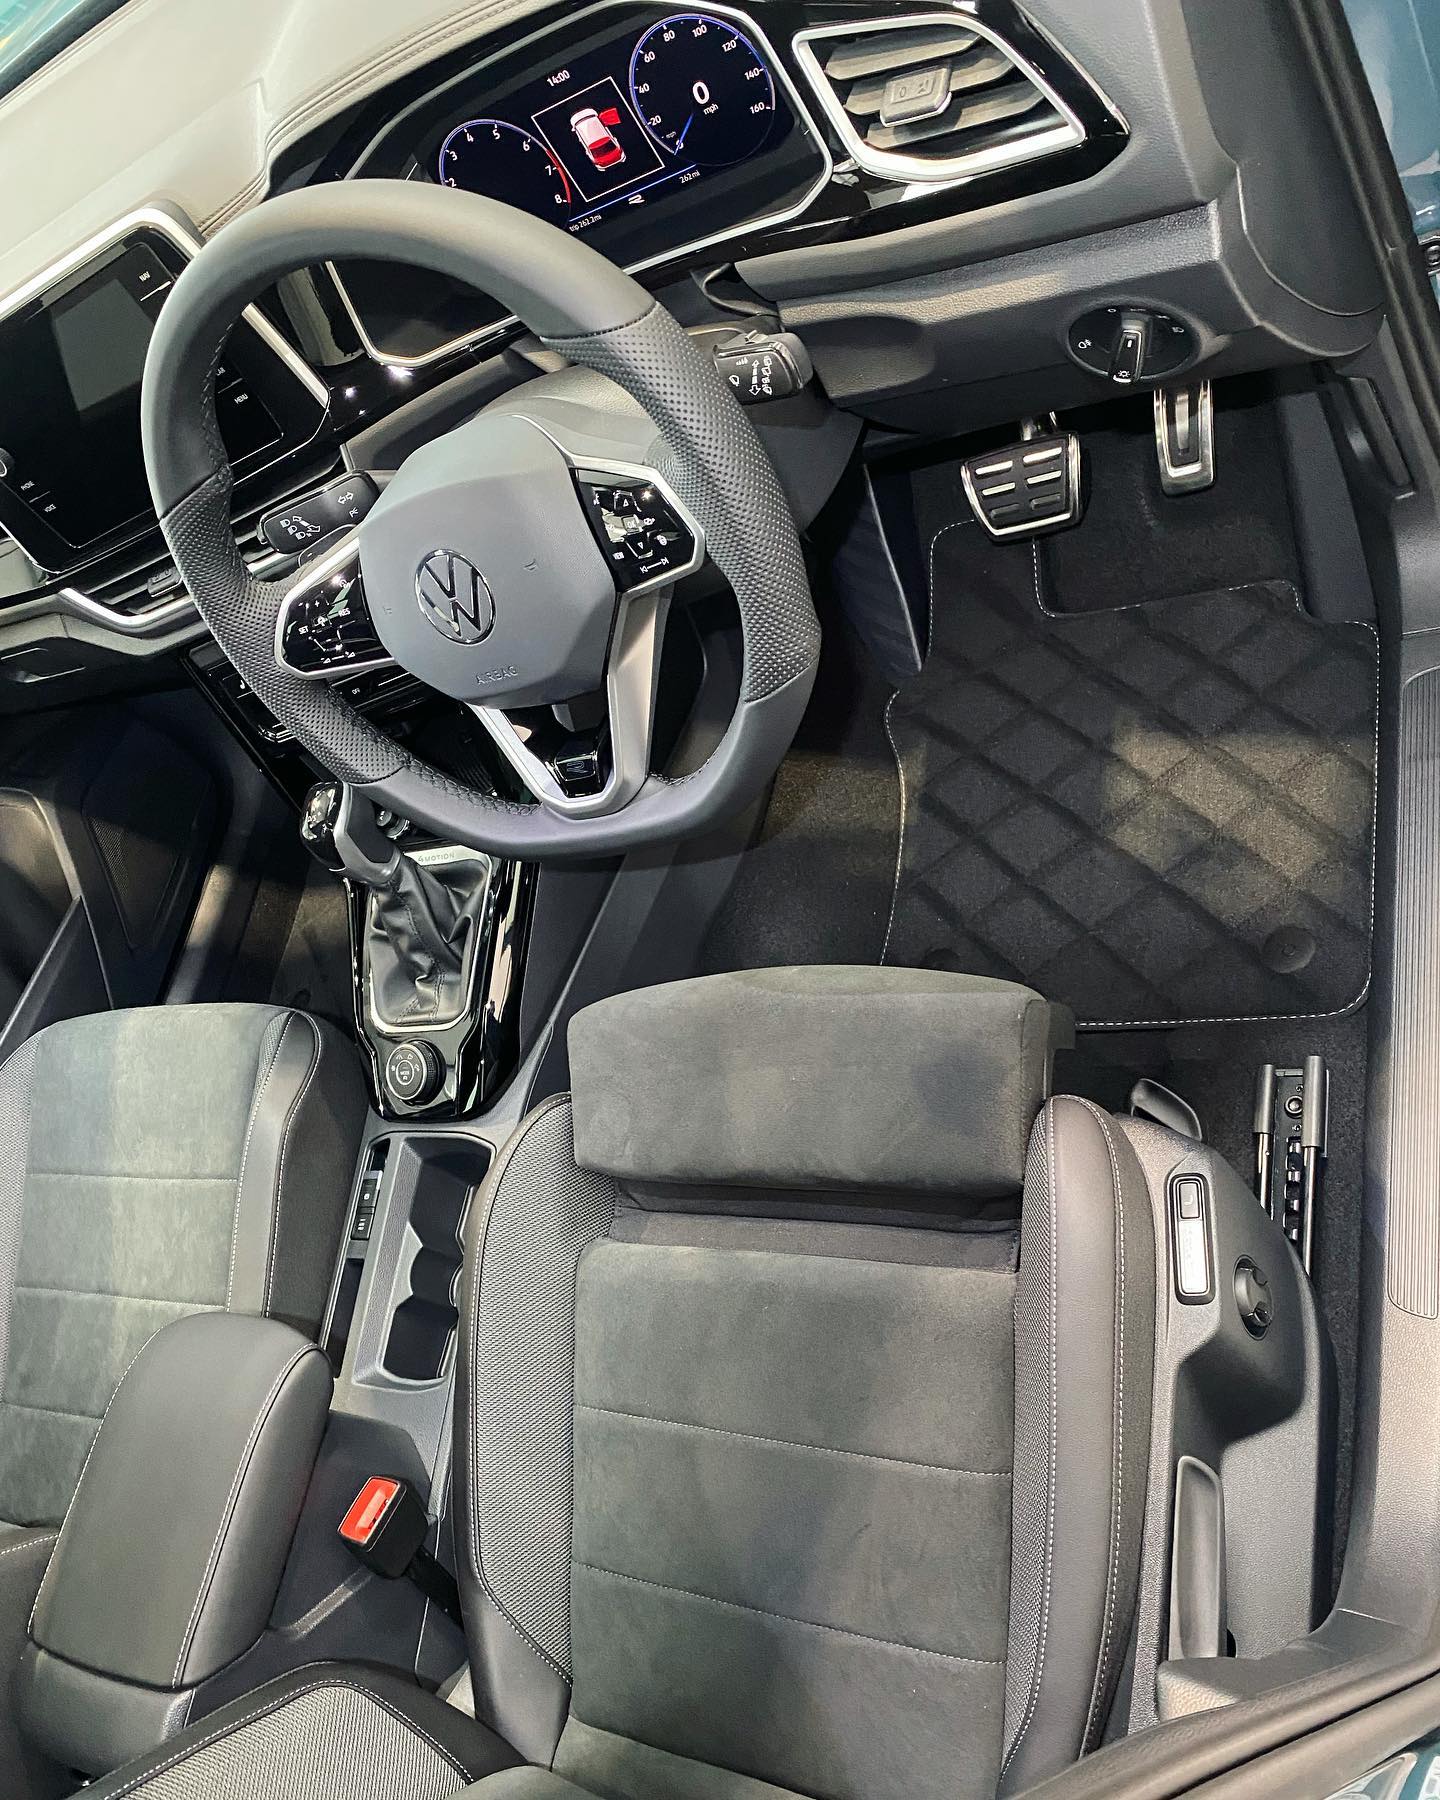 Interior view of a volkswagen vehicle showing the steering wheel, dashboard, and driver's seat.